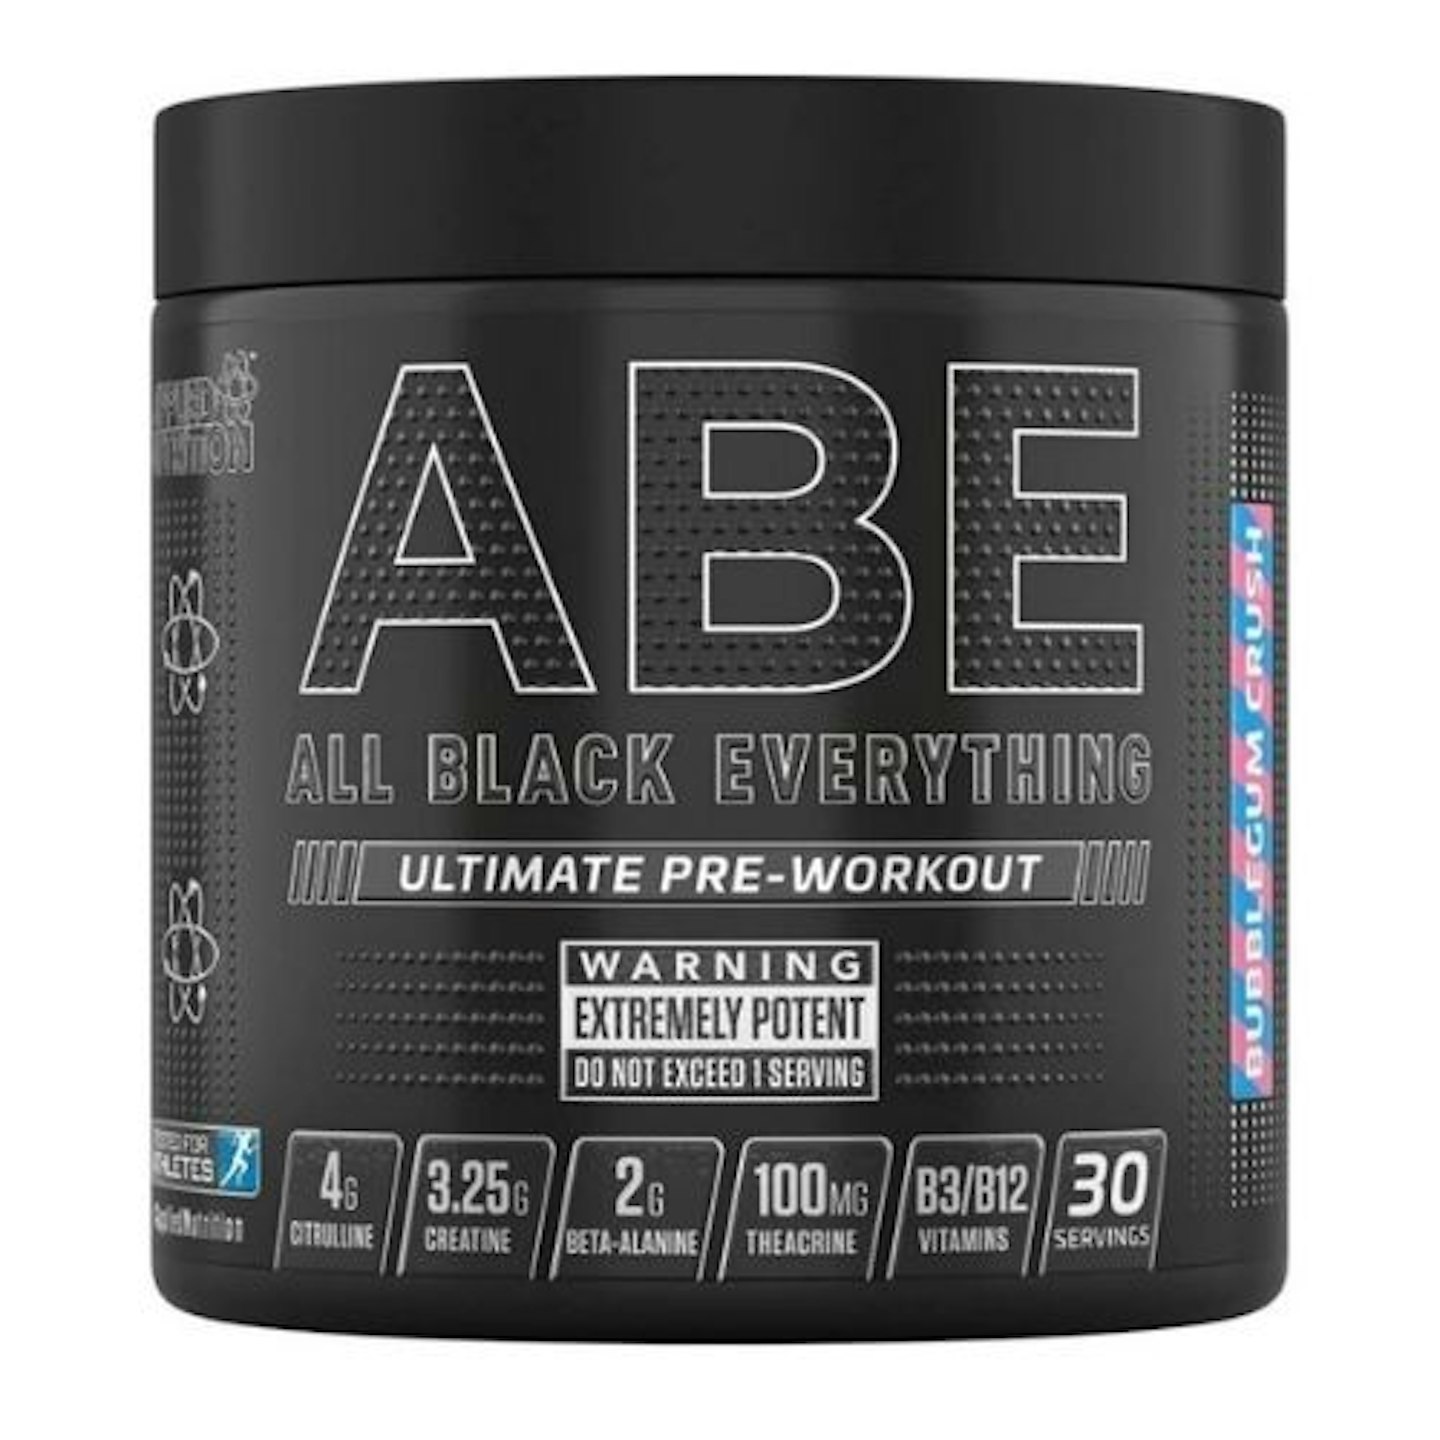 All Black Everything pre-workout